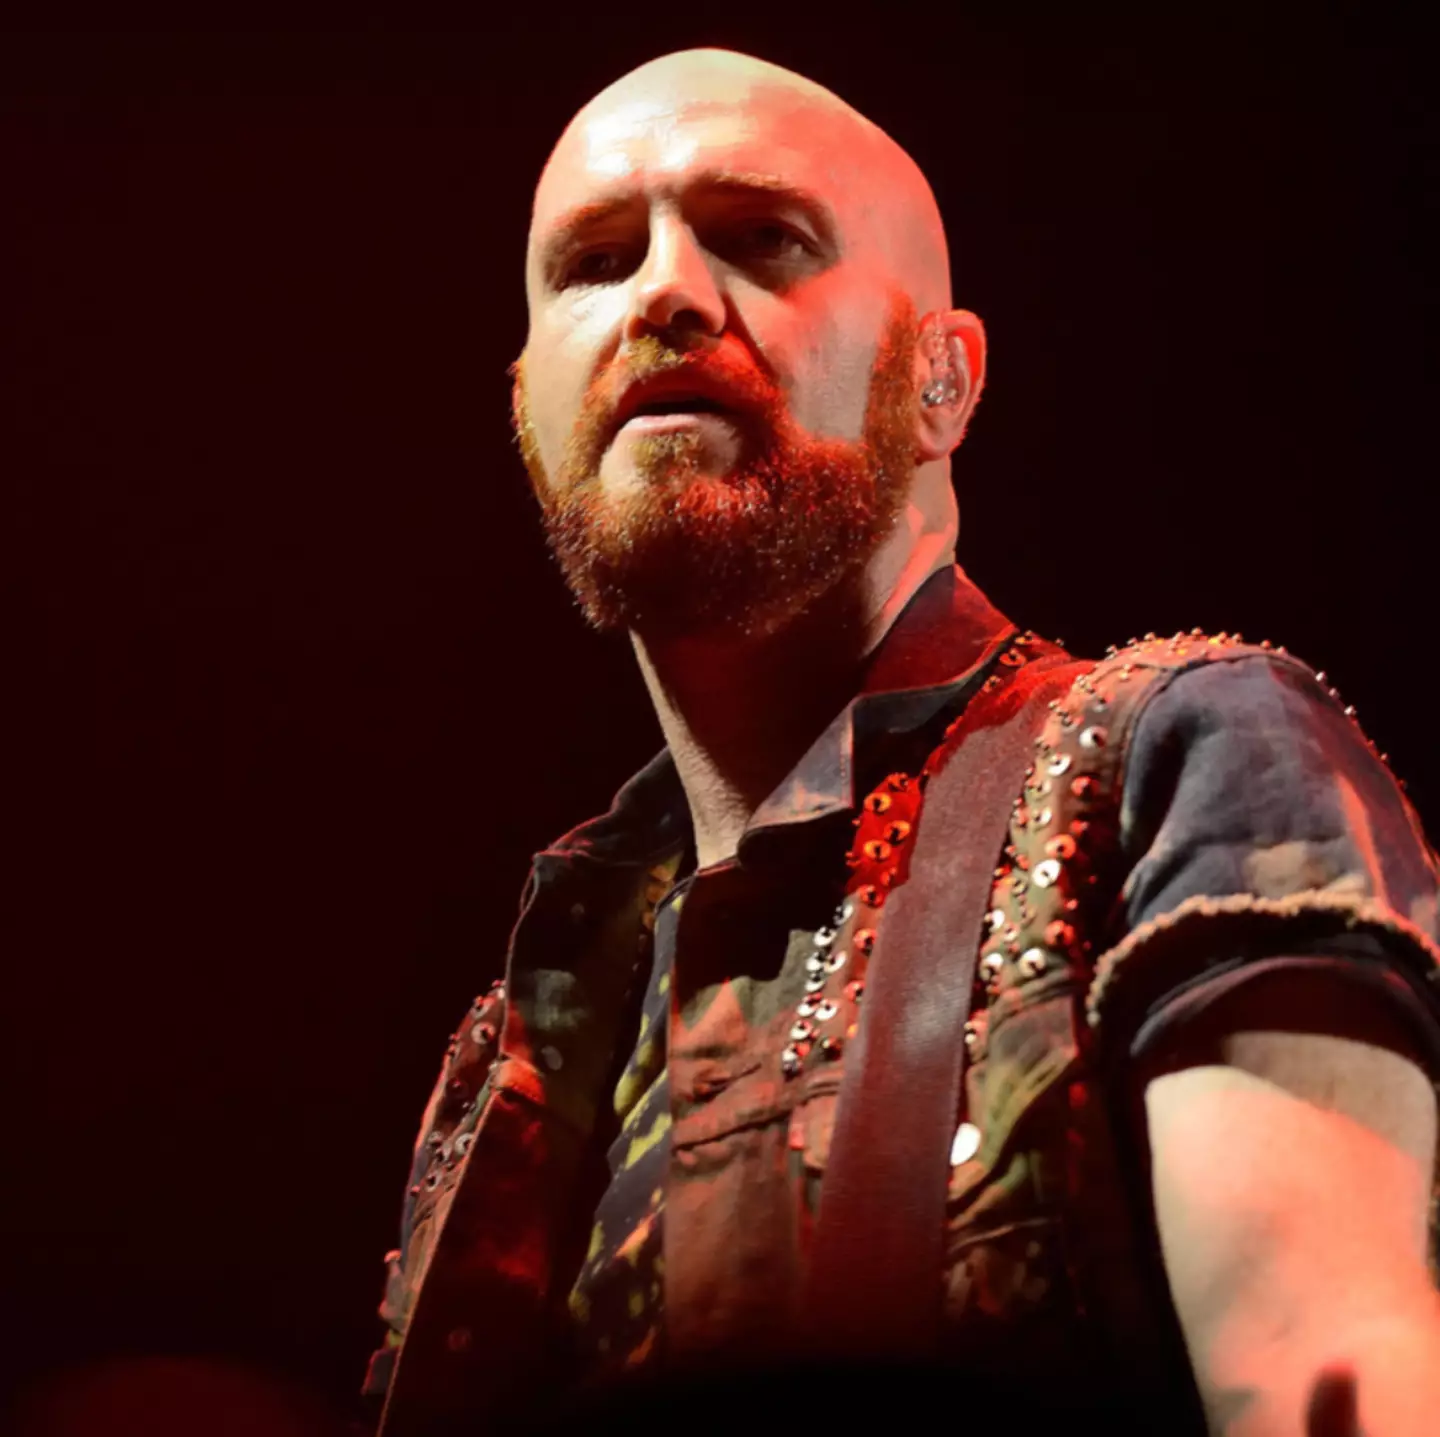 Mark Sheehan has died at the age of 46.